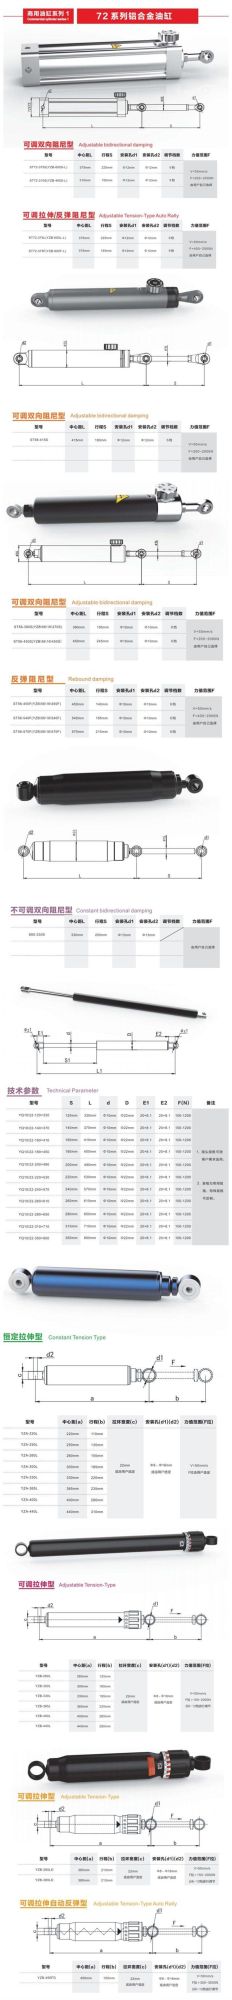 Rebound Damping Hydraulic Cylinder for Hip Flexor and Extensor